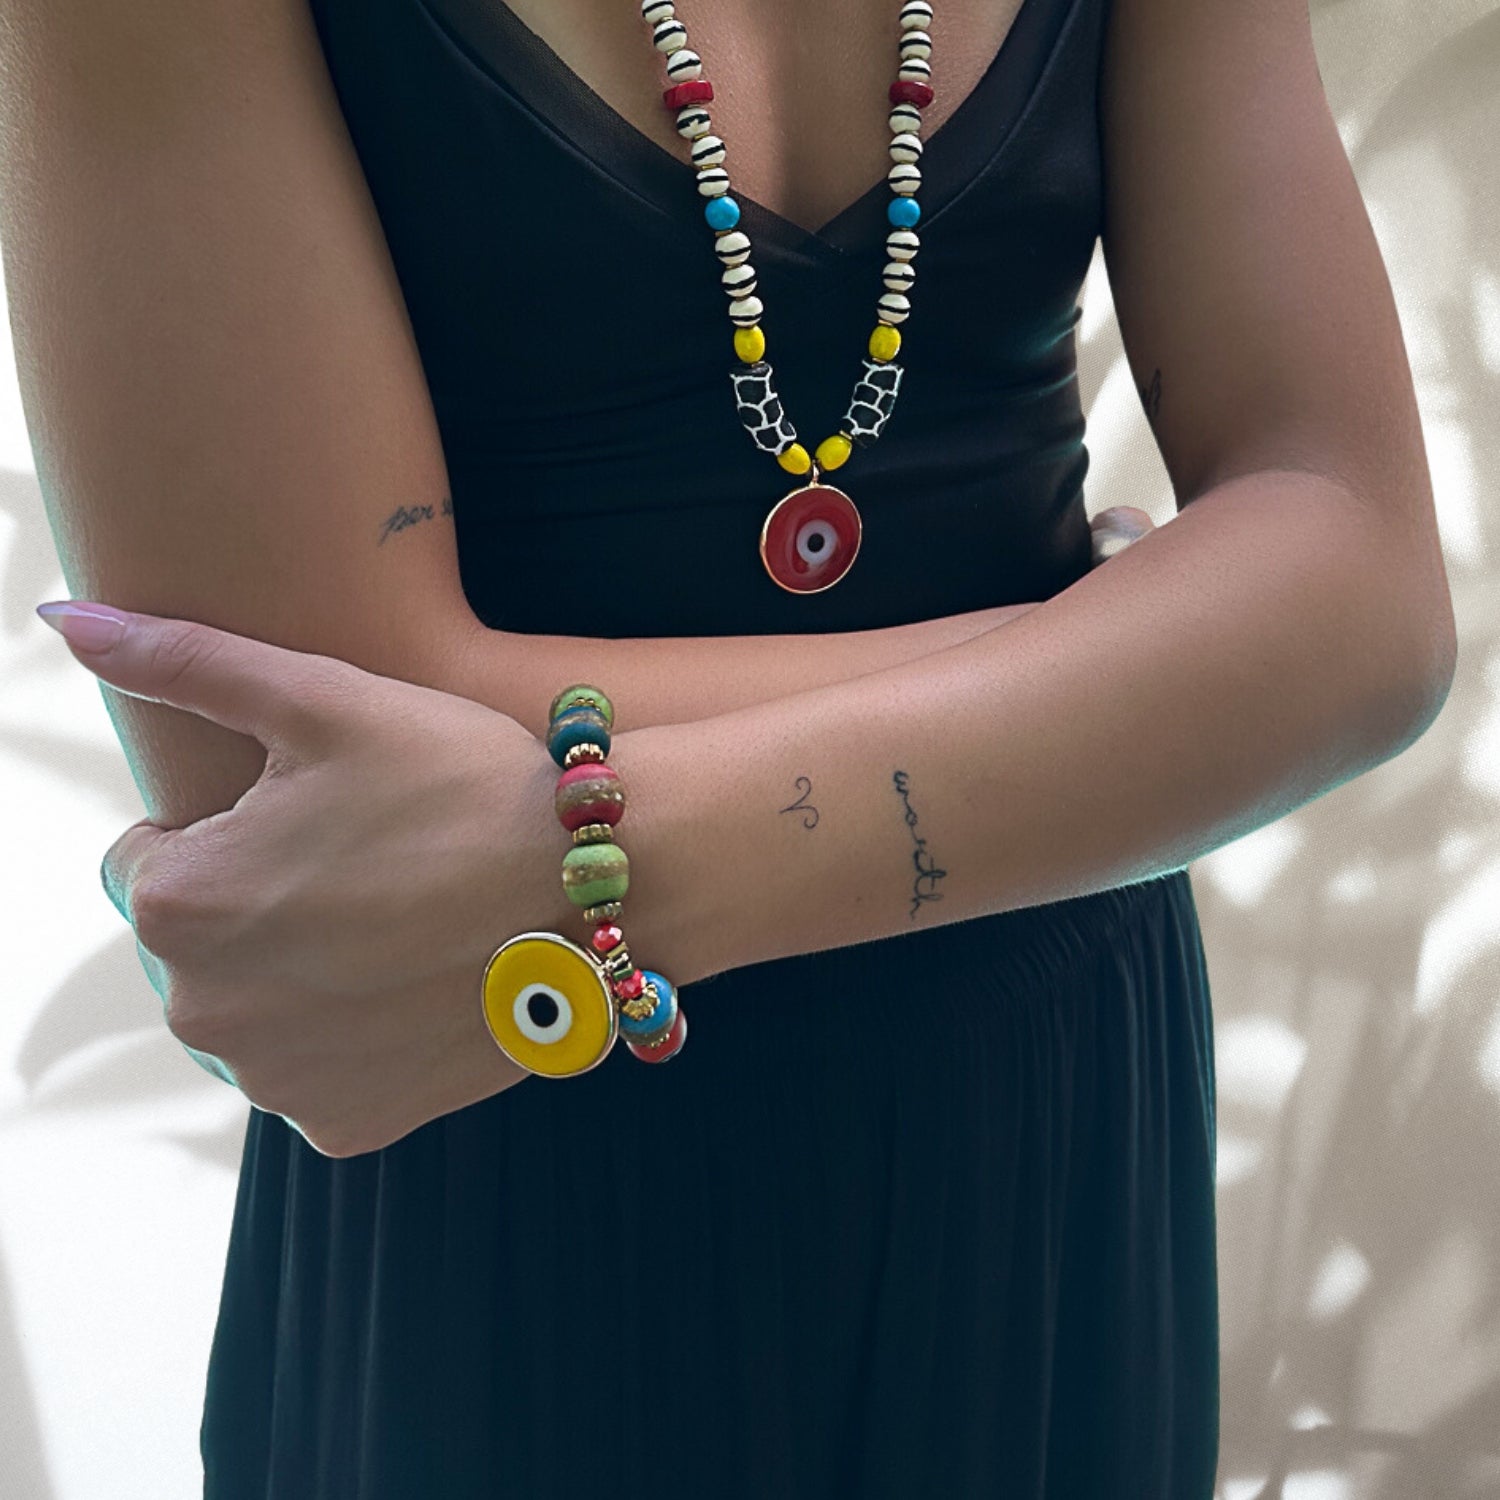 See how the Yellow Evil Eye Carpe Diem Bracelet adorns the hand model's wrist, adding a pop of color and reflecting her adventurous spirit.